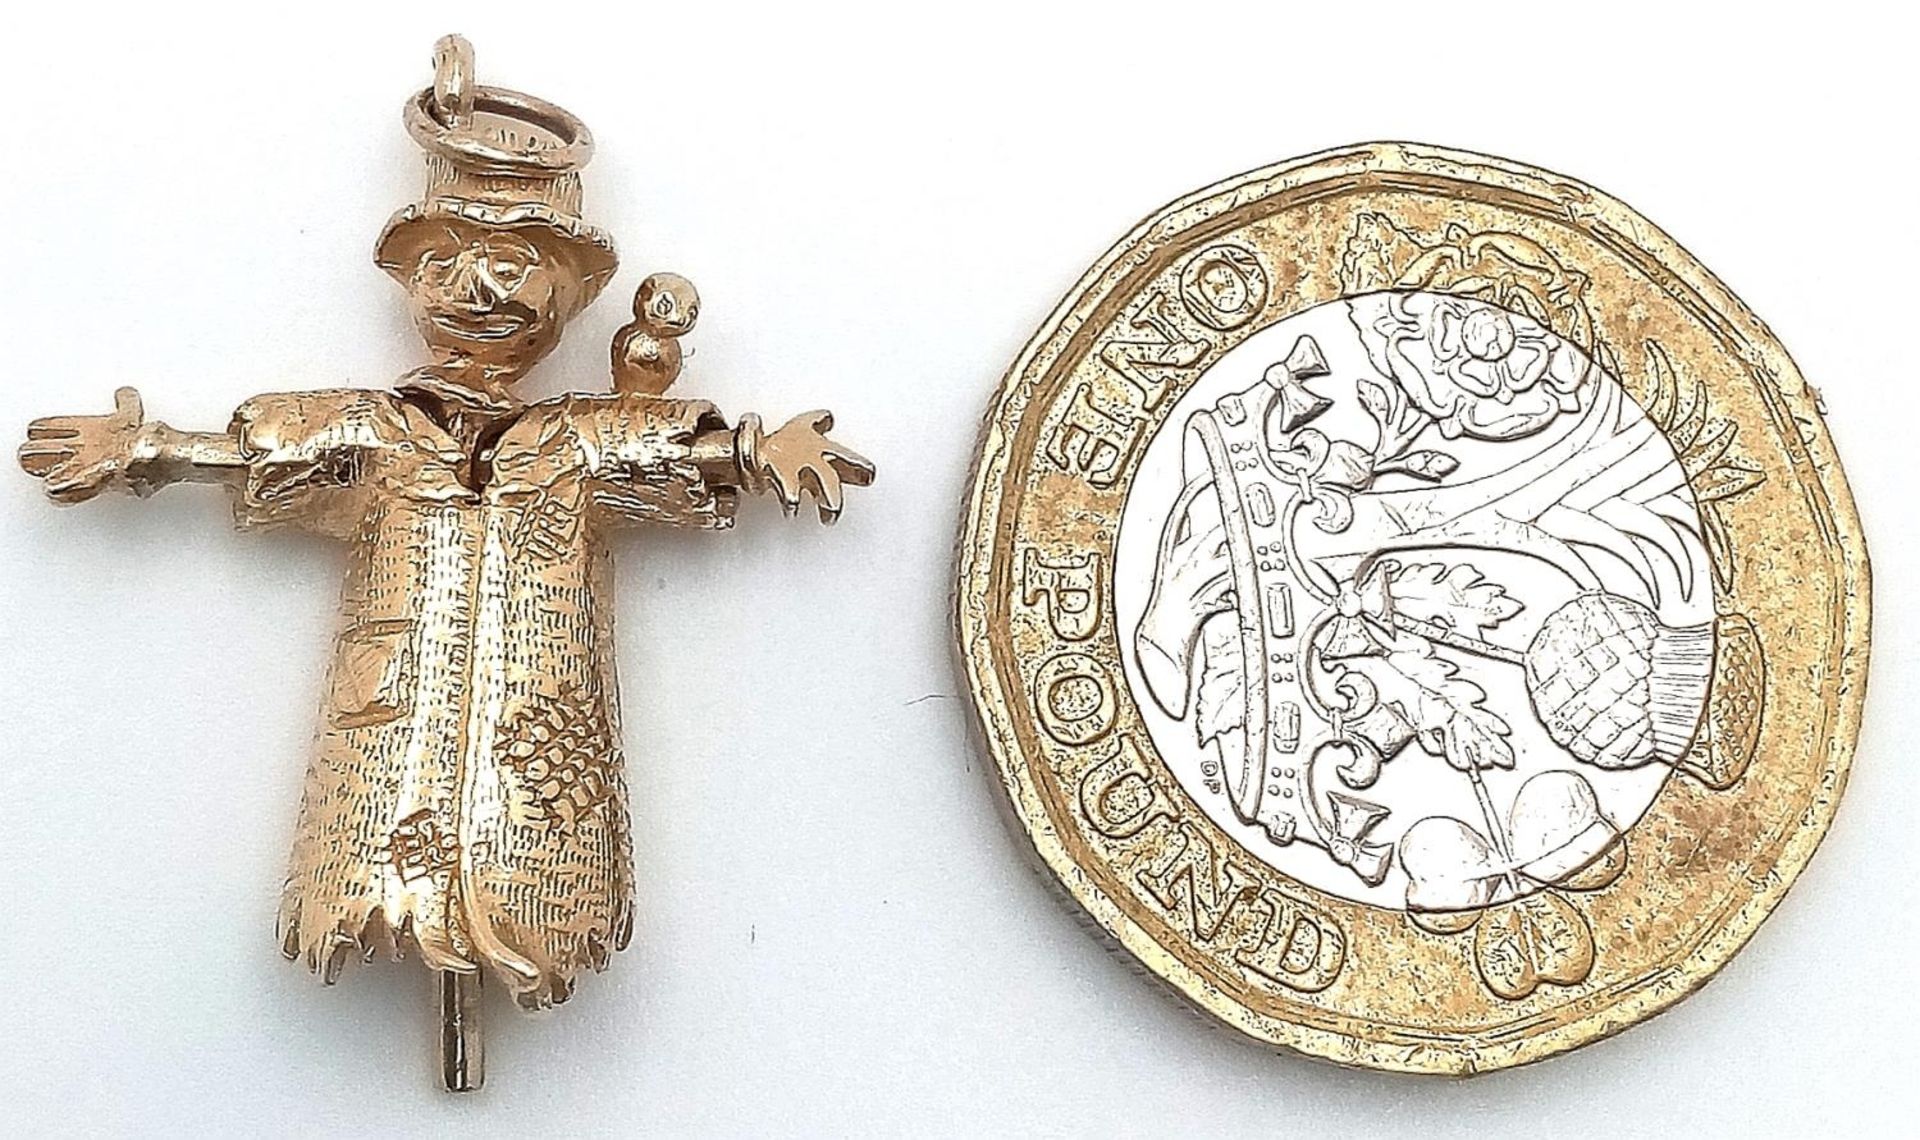 A 9K YELLOW GOLD SCARECROW CHARM WITH MOVING PARTS. 28mm length, 3.2g weight. Ref: SC 9056 - Image 3 of 3